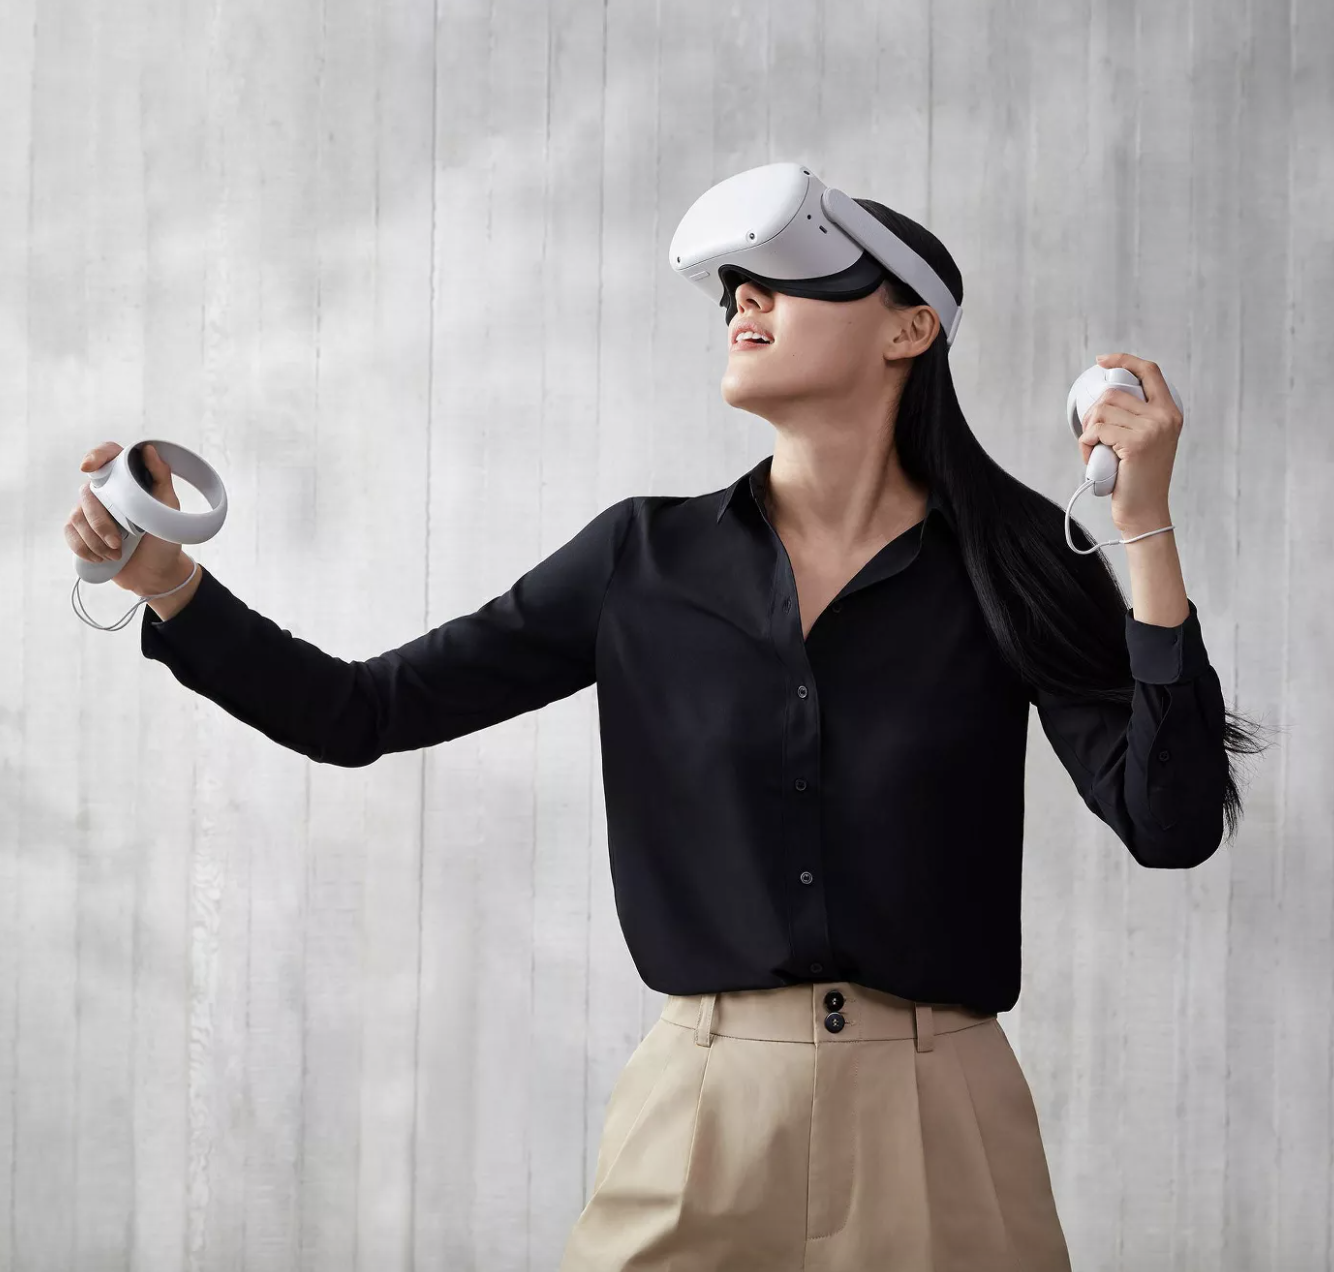 Model is wearing the Oculus VR headset and holding the remote controls in their hand